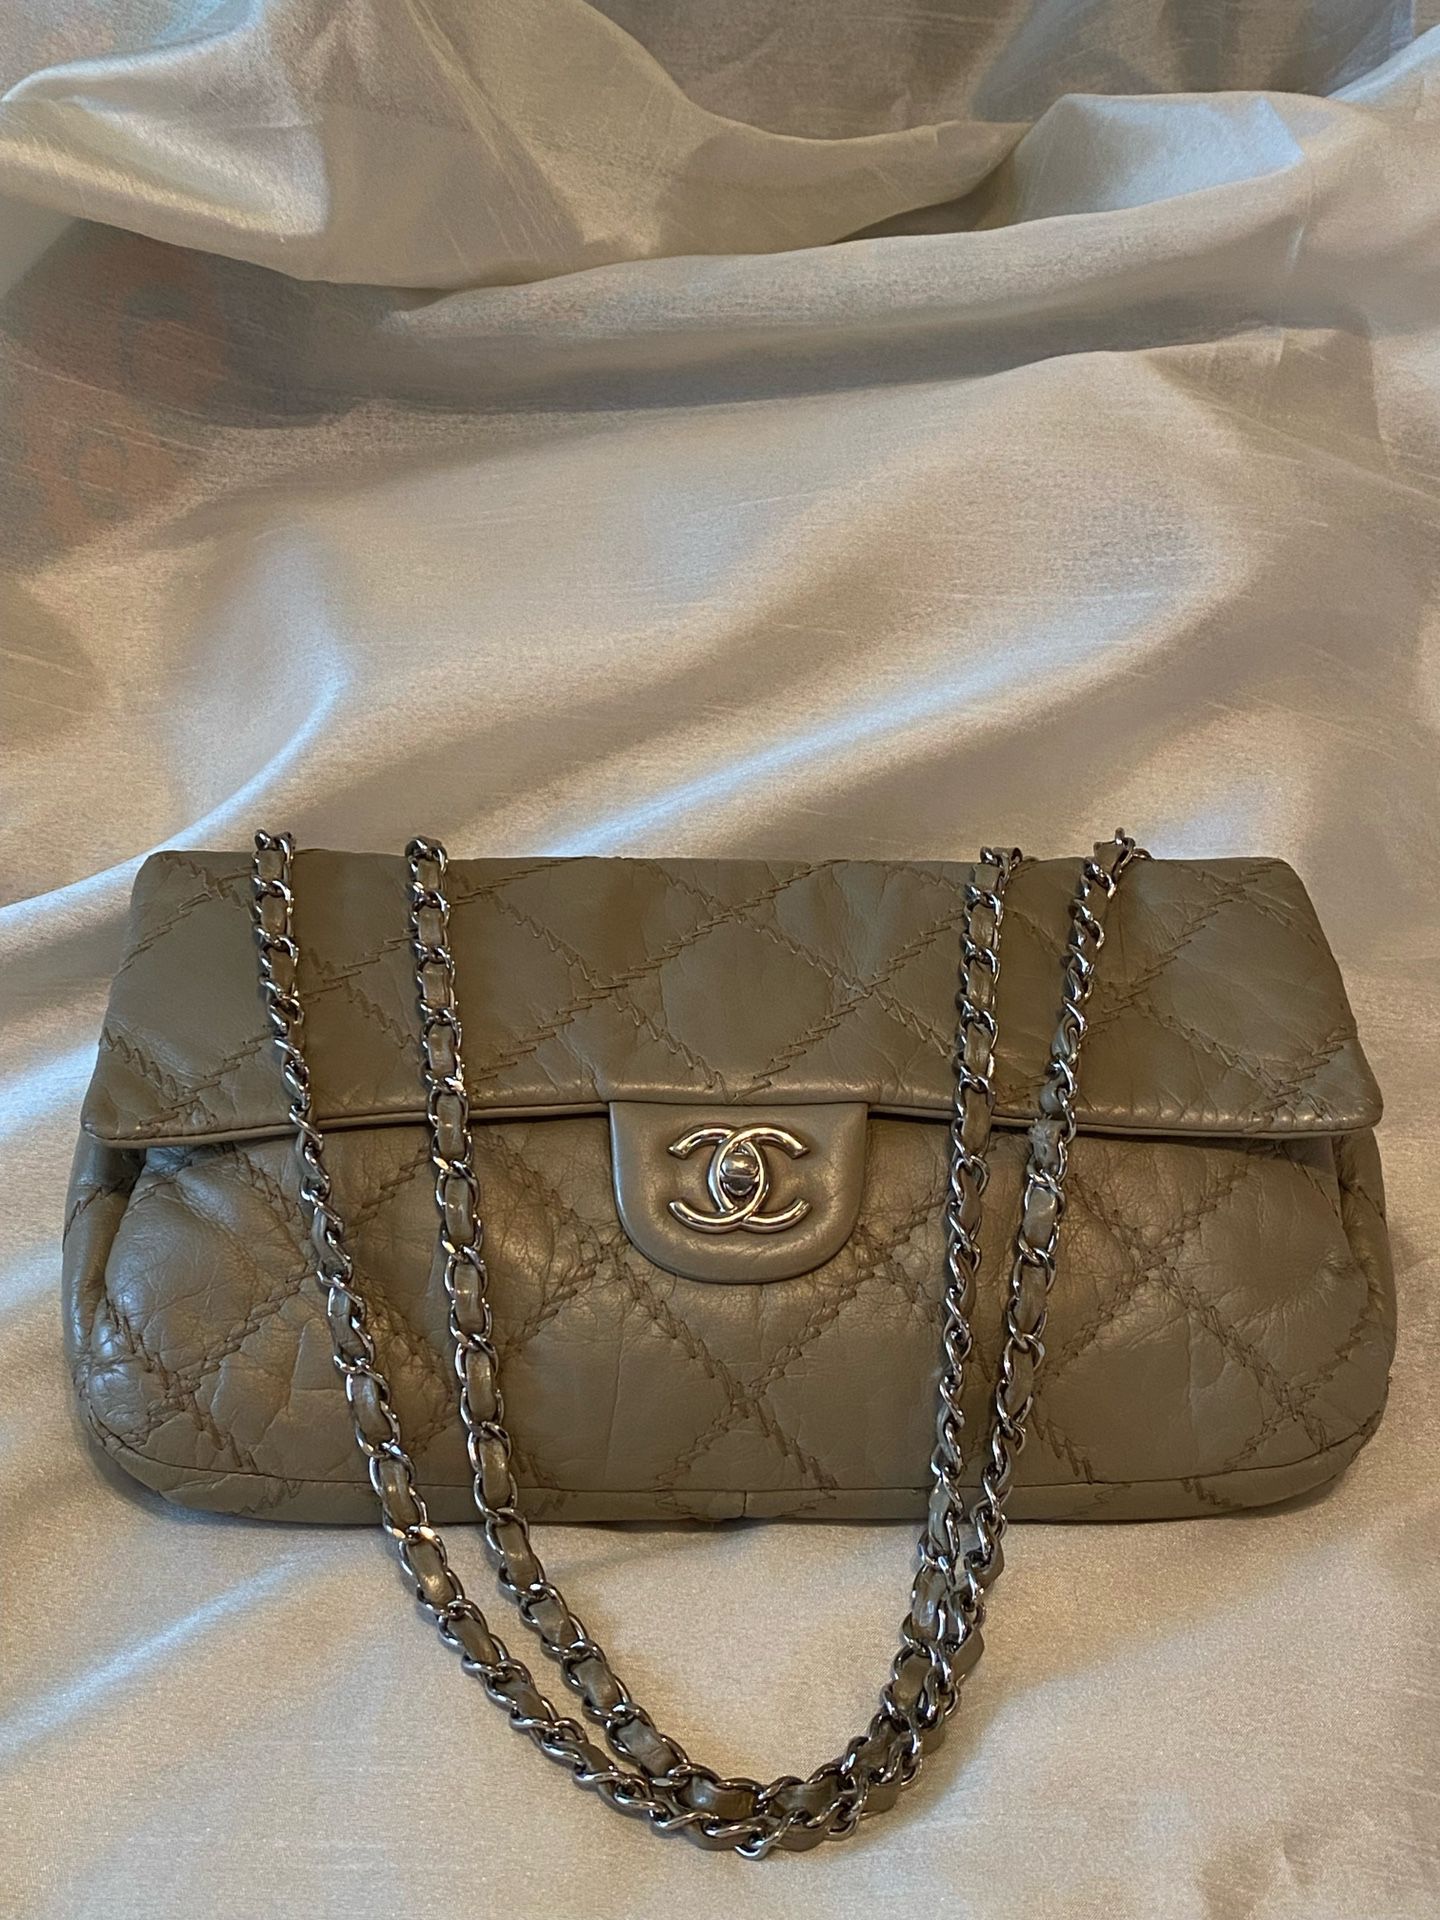 Chanel Quilted Large Authentic Bag